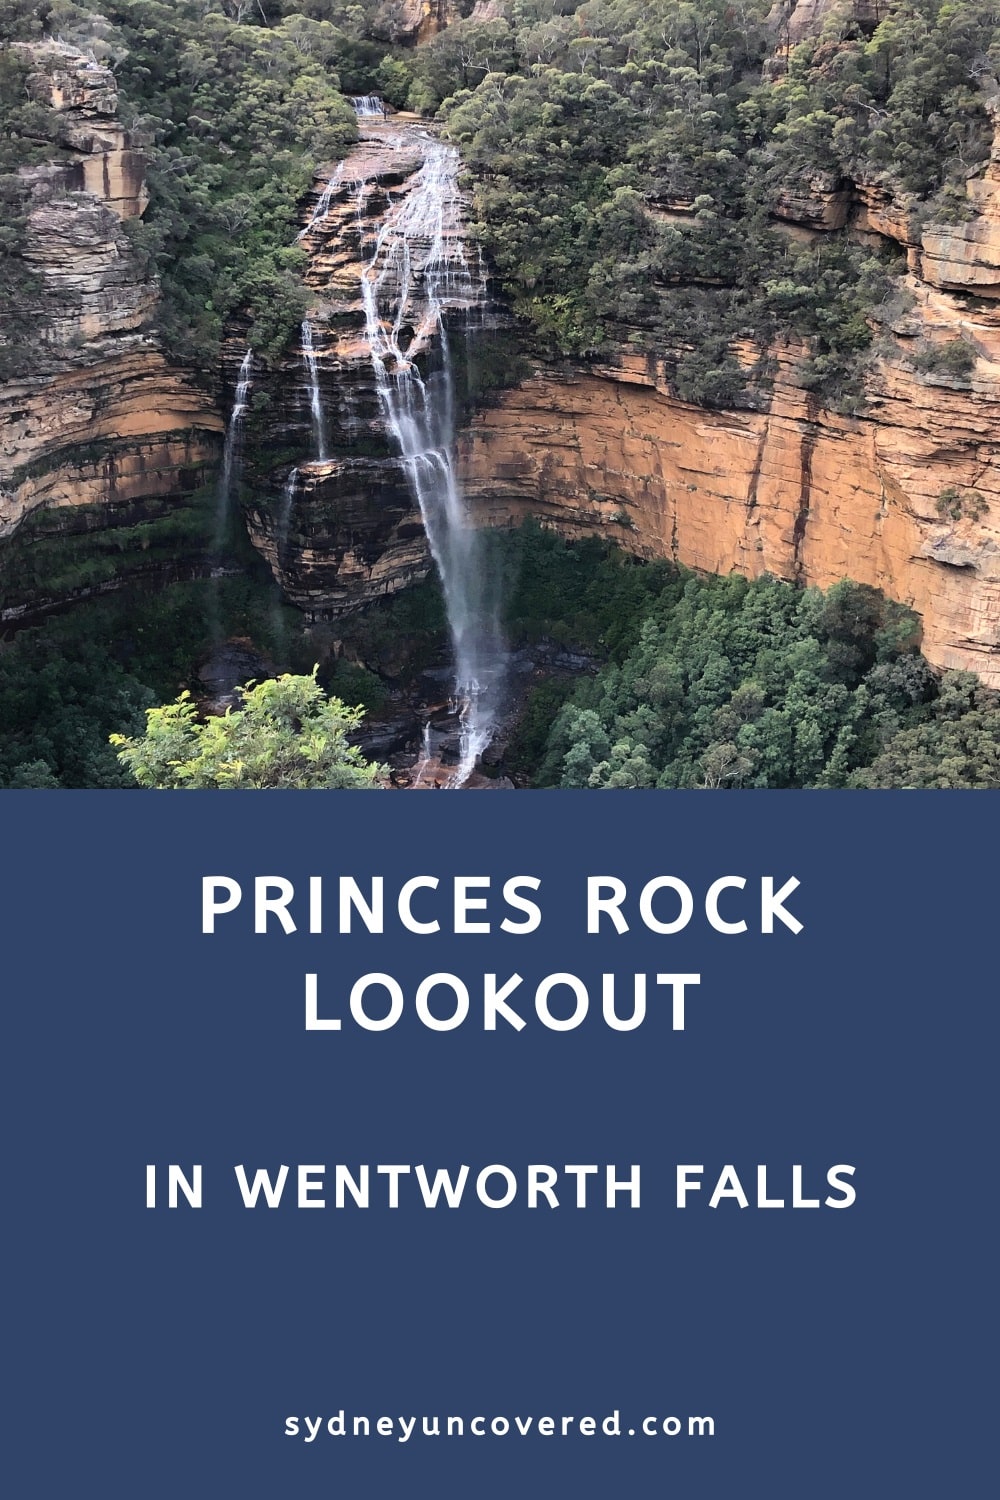 Princes Rock walking track and lookout point in Wentworth Falls